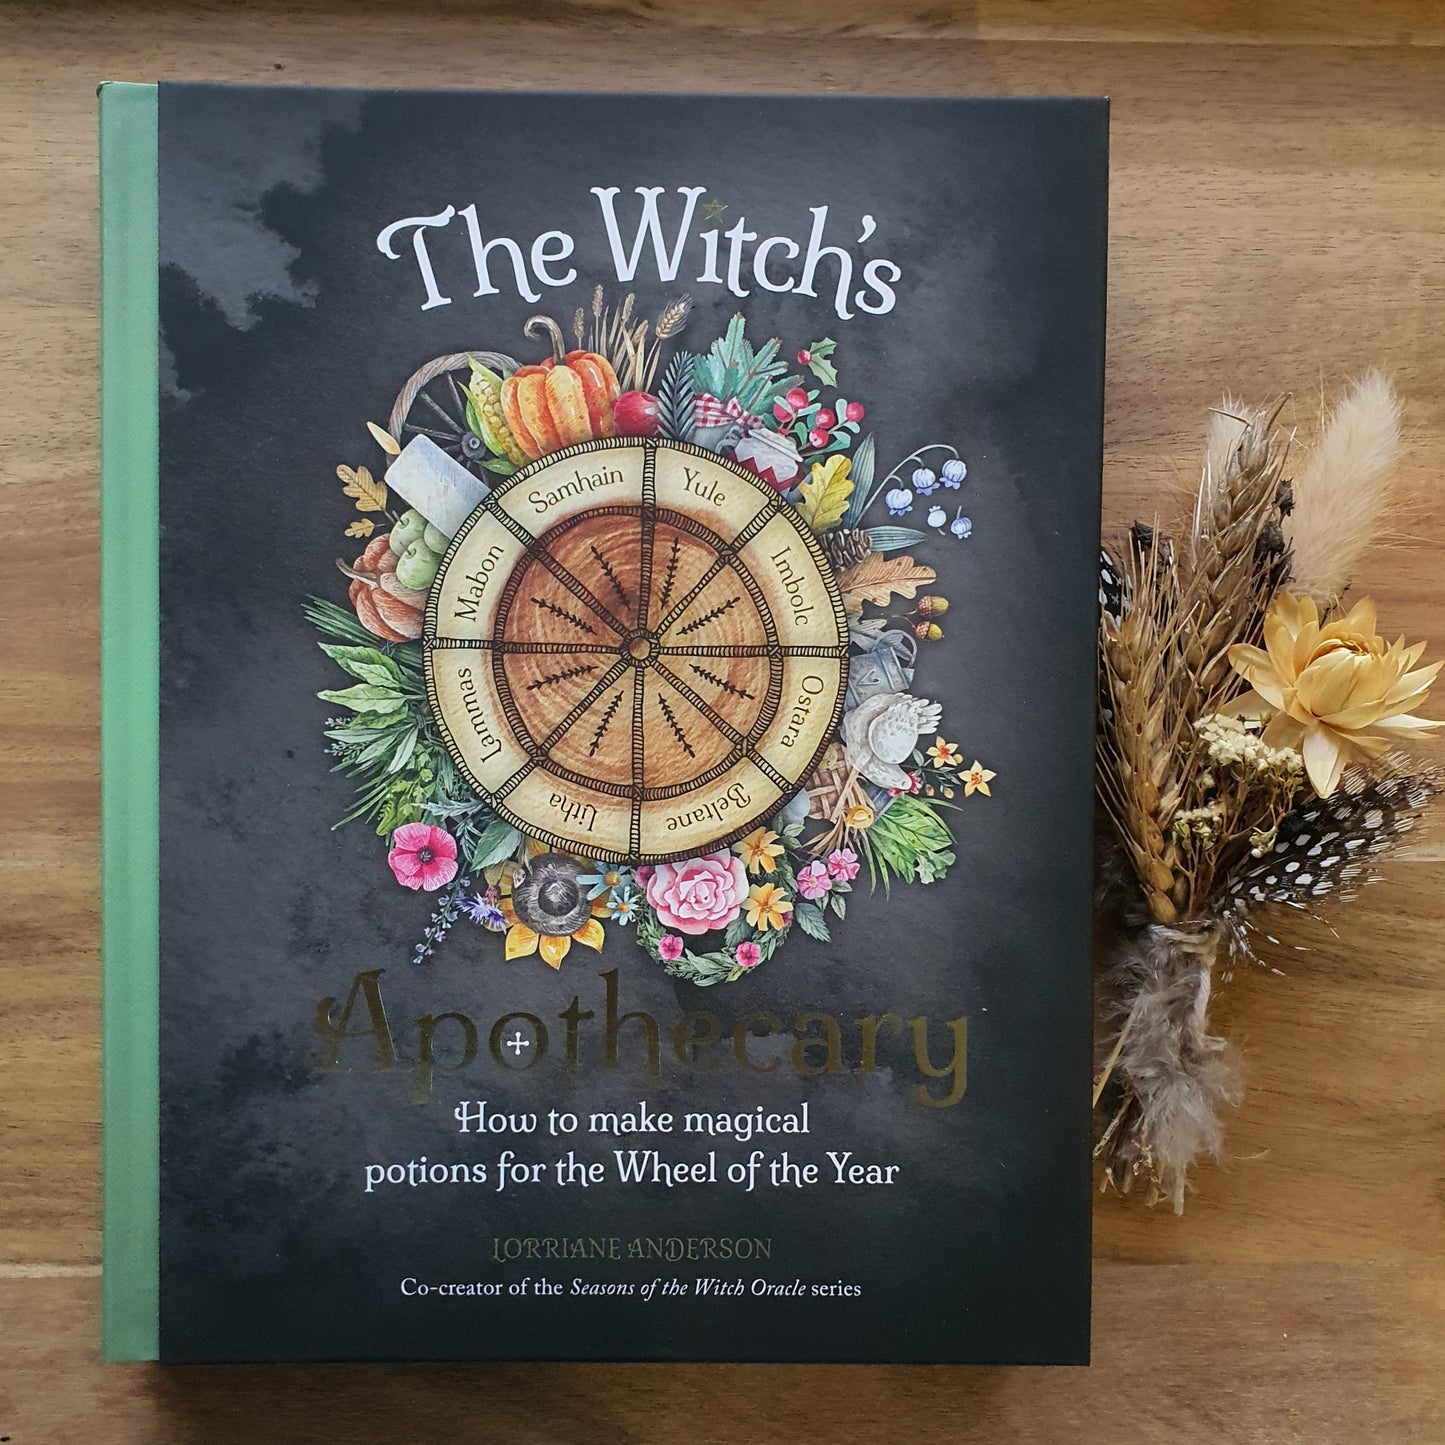 The Witch's Apothecary: Seasons of the Witch